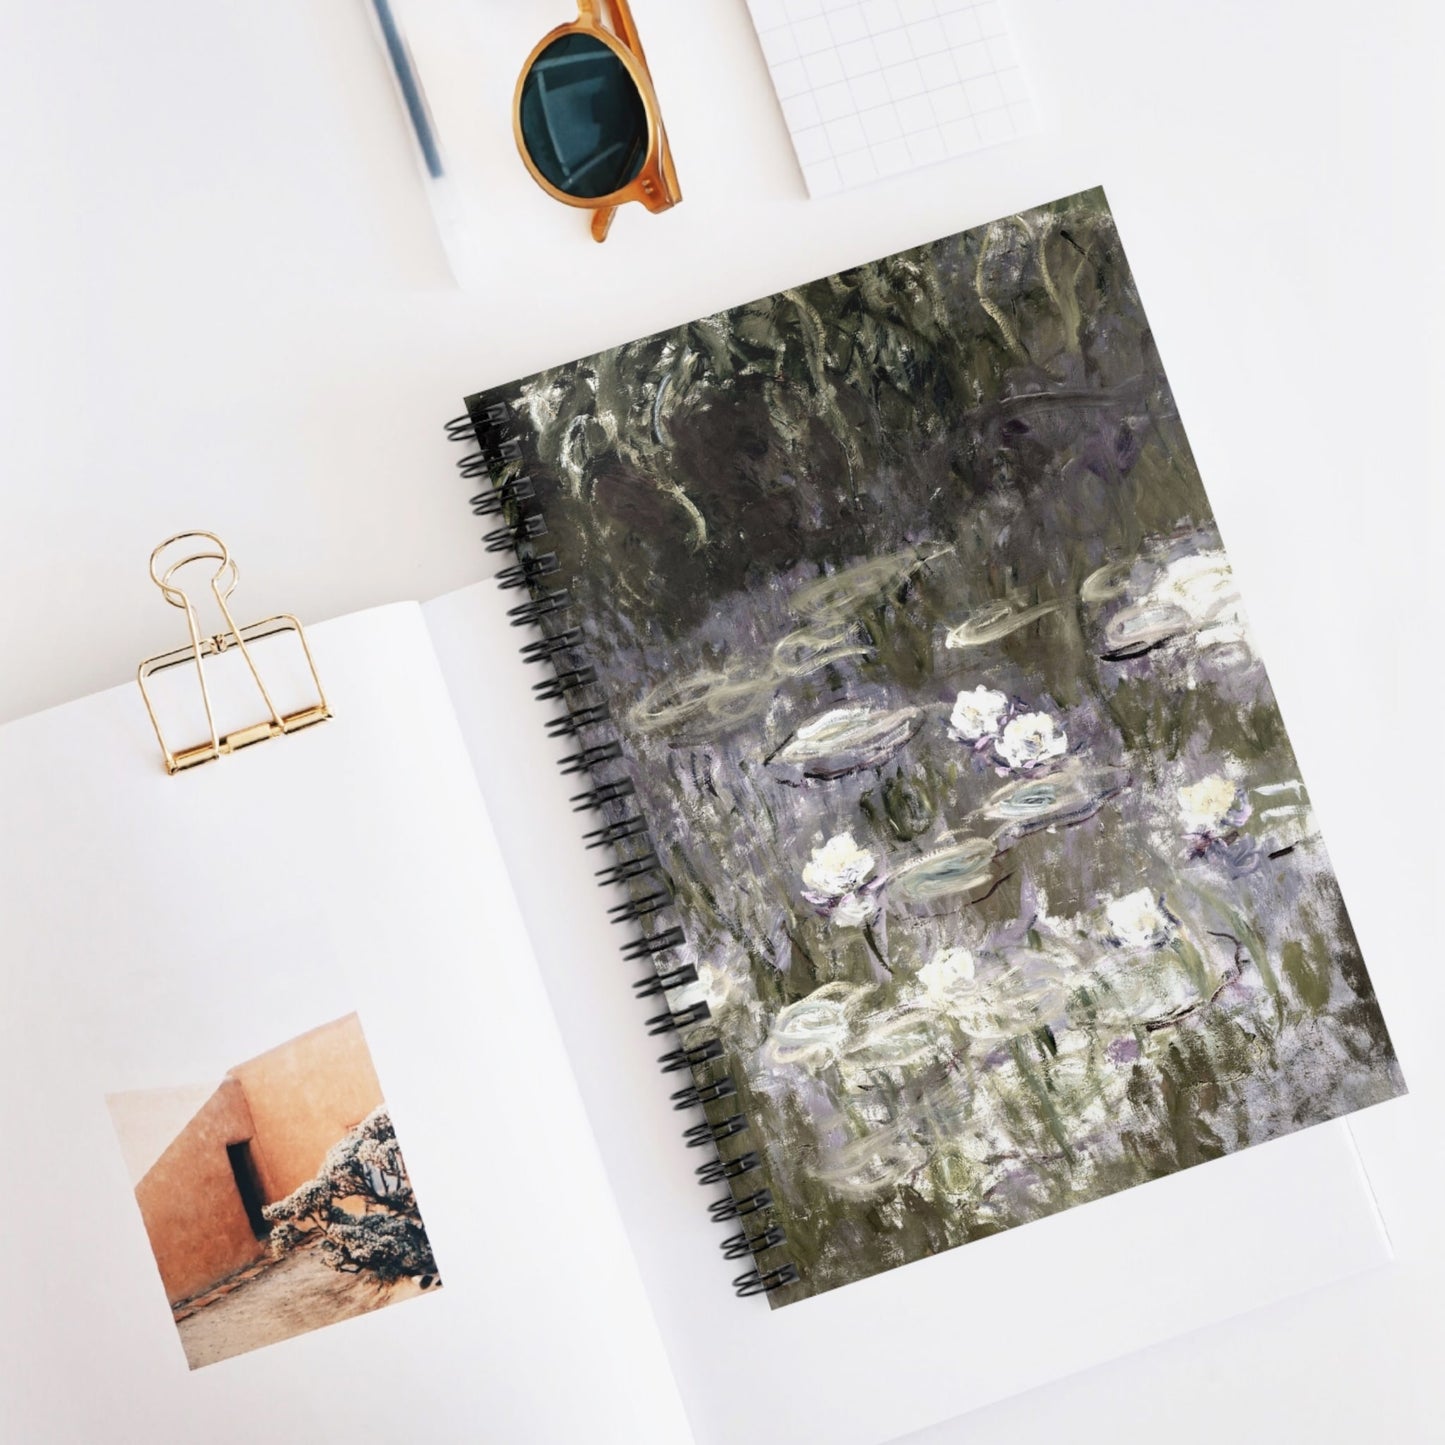 White Lilies on a Pond Spiral Notebook Displayed on Desk